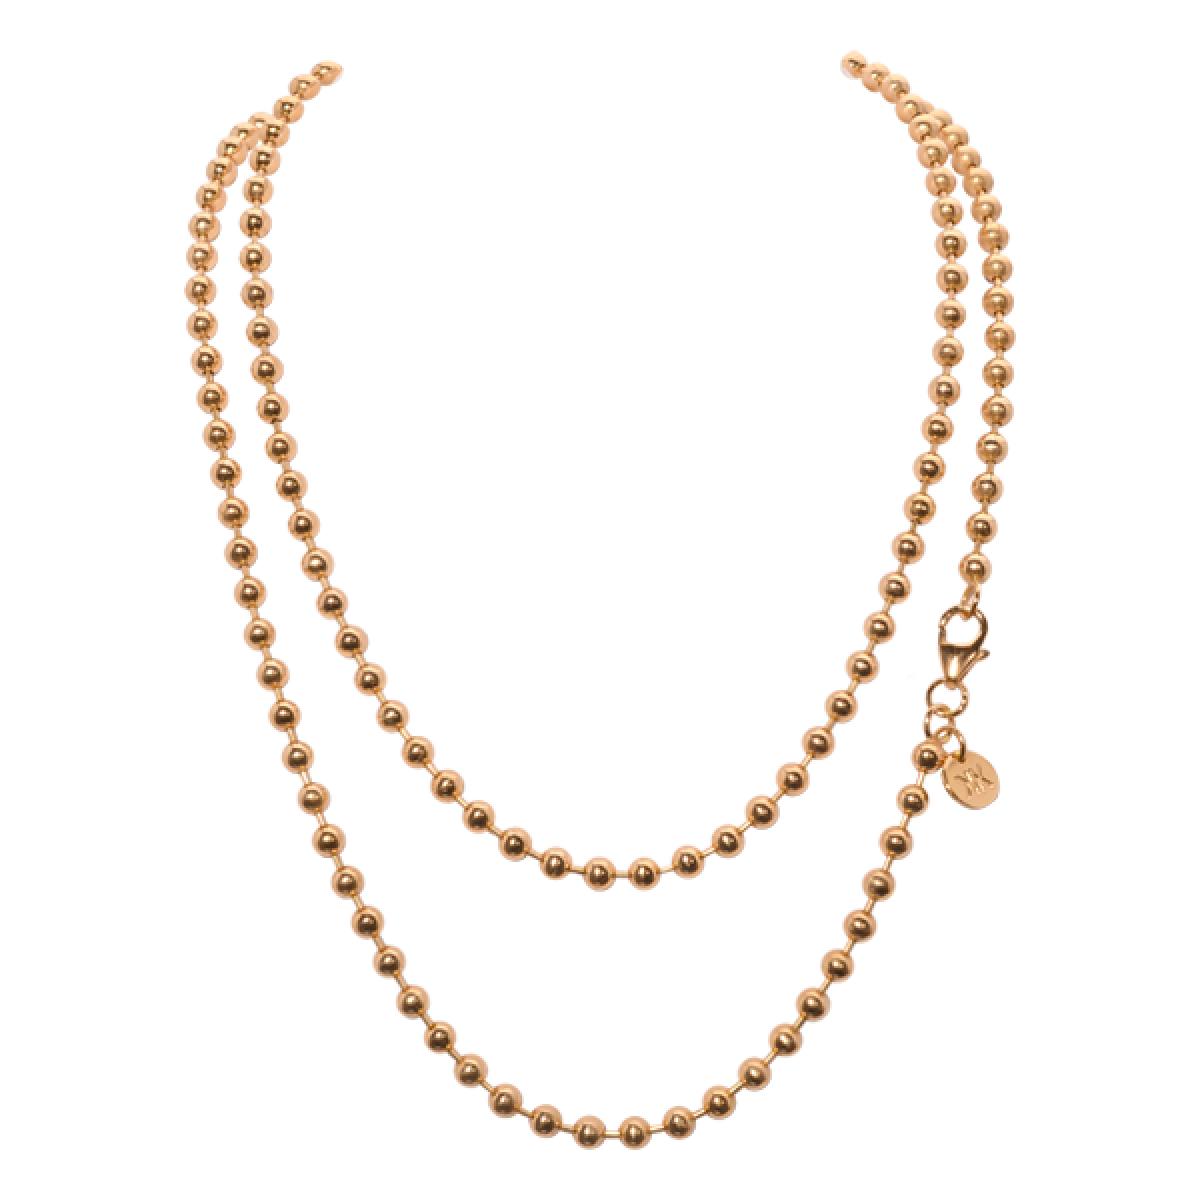 Jewellery Chain Png Hd - , Transparent background PNG HD thumbnail